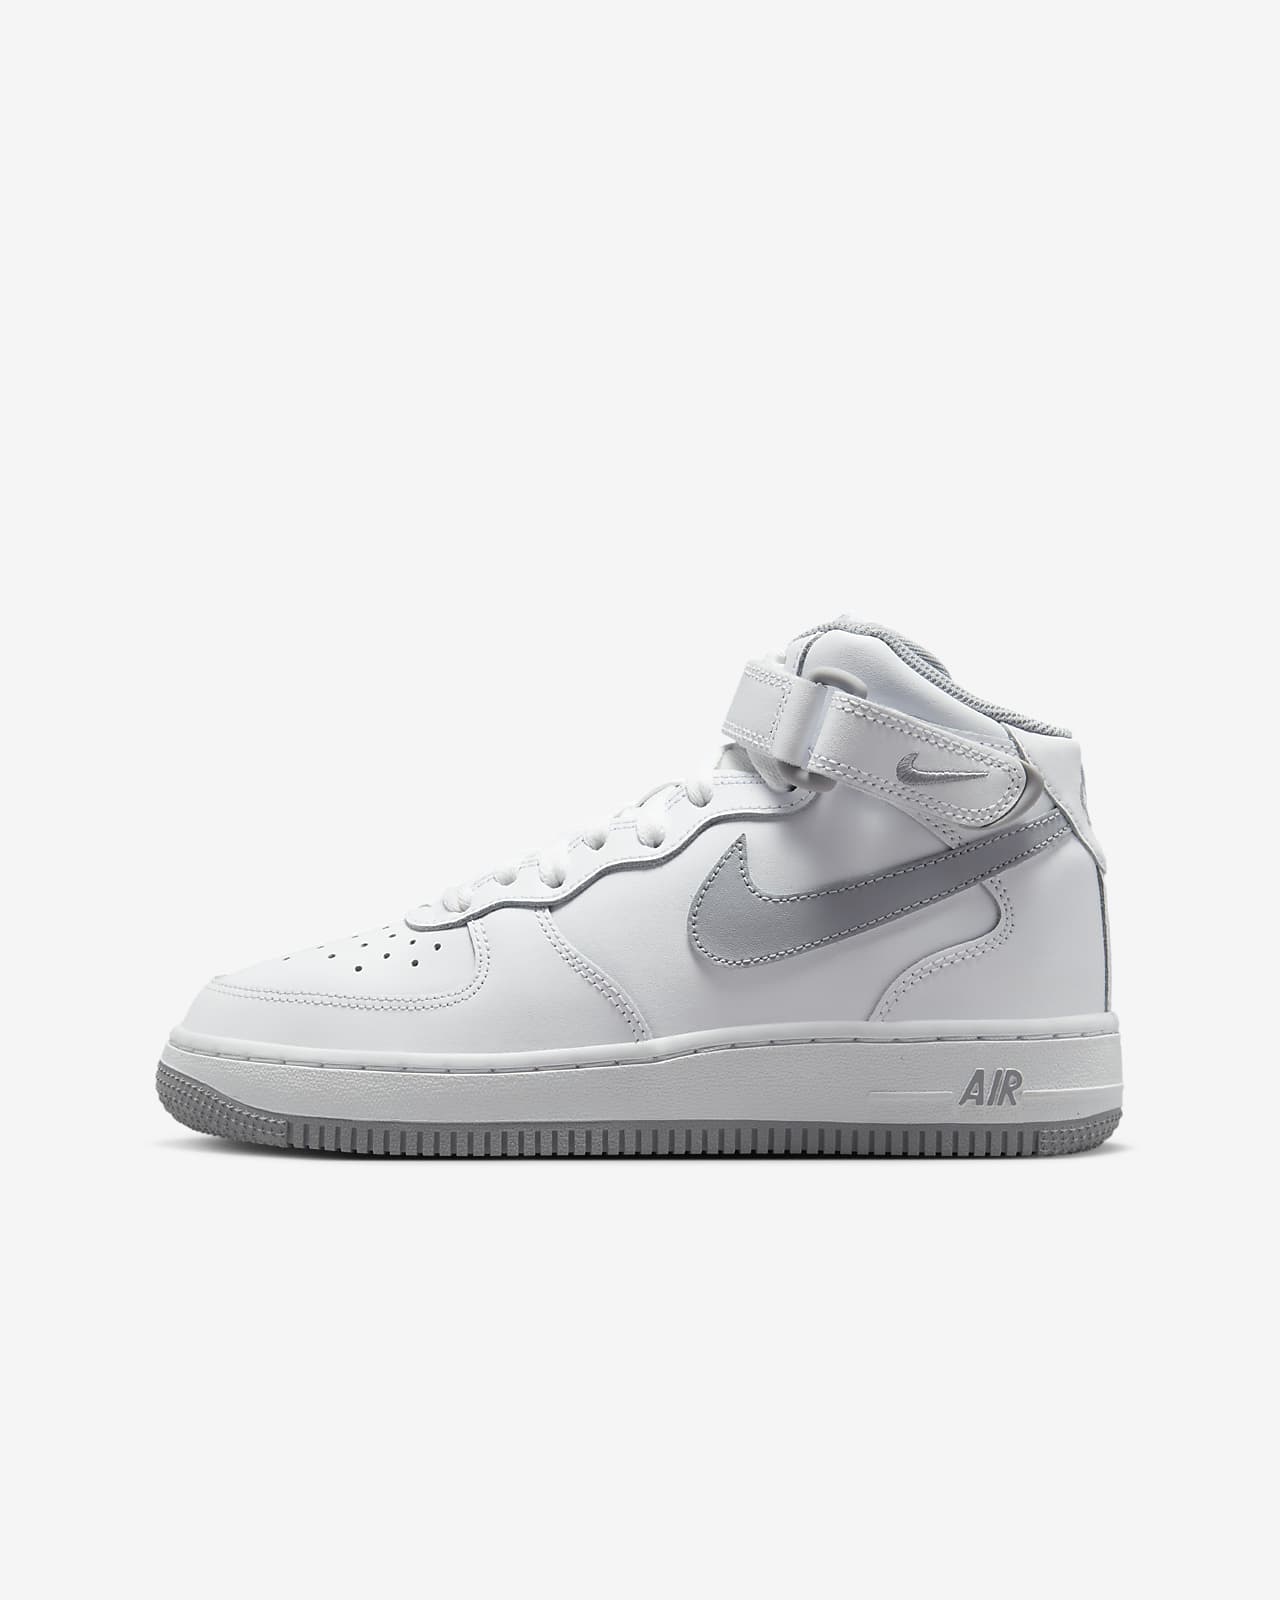 Nike Air Force 1 Mid LE Big Kids' Shoes